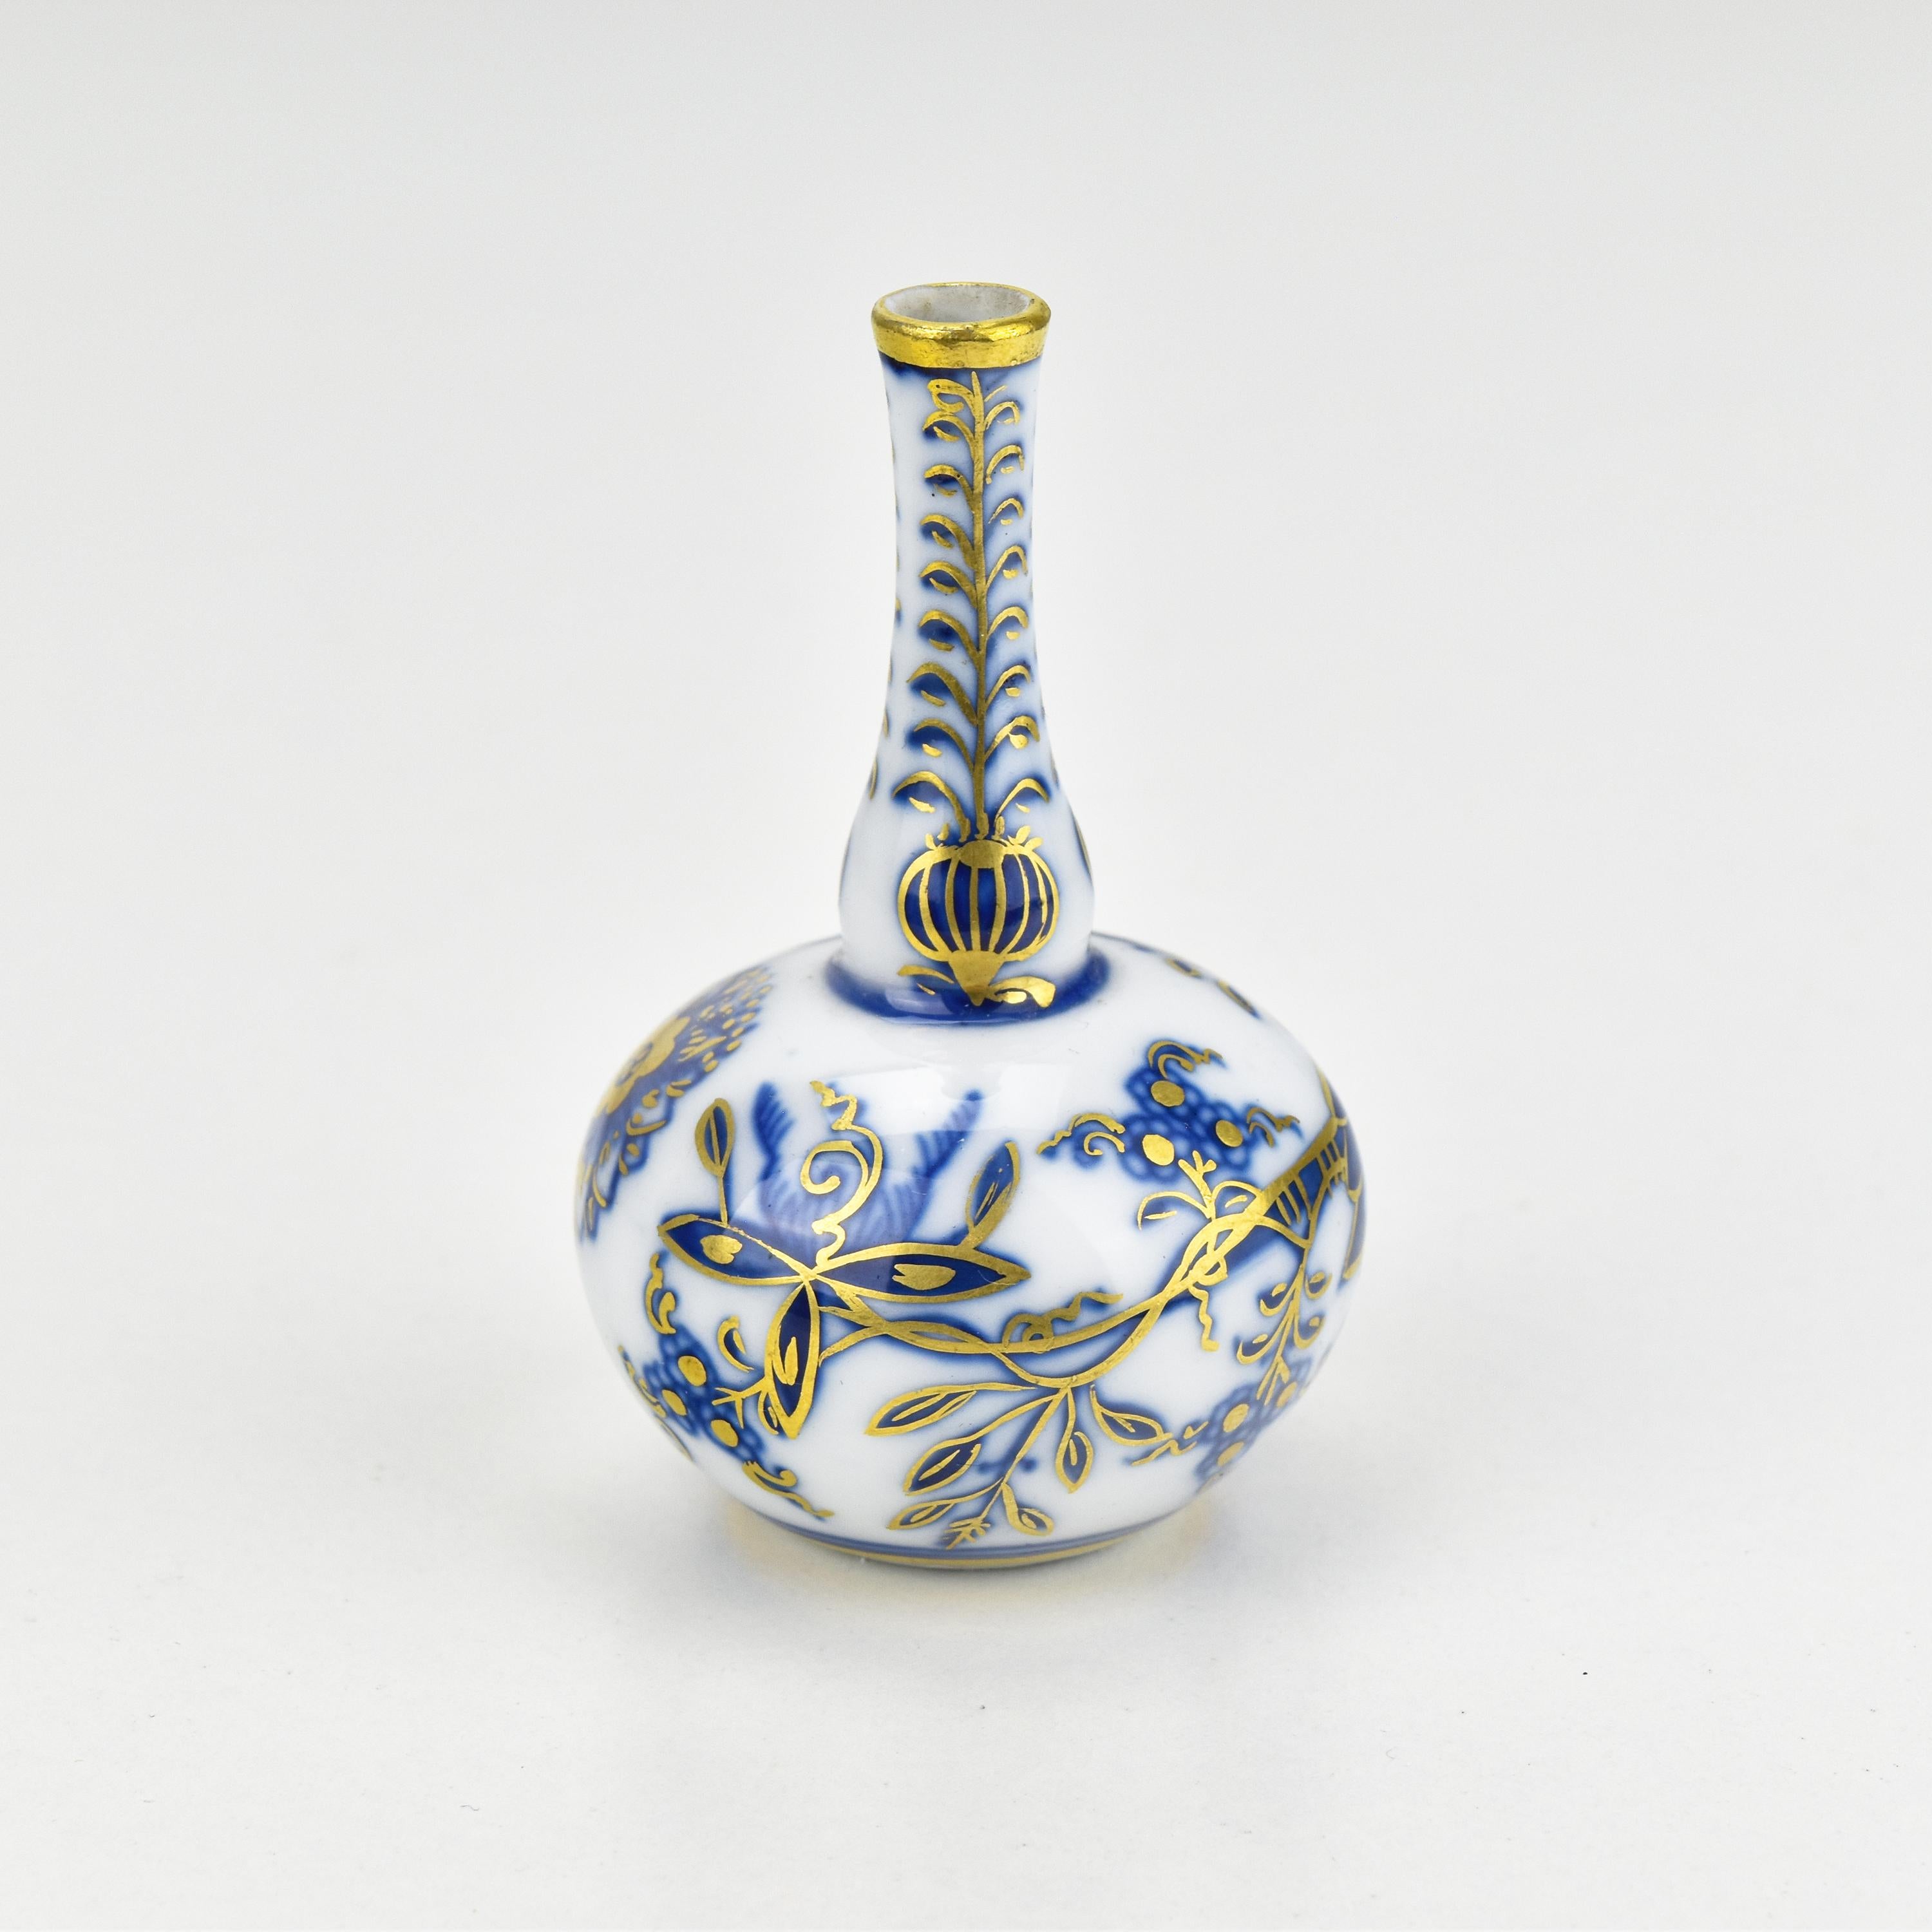 This antique miniature vase from Meissen is a remarkable example of fine porcelain craftsmanship. 

Crafted from pristine white porcelain, it features the iconic cobalt blue 